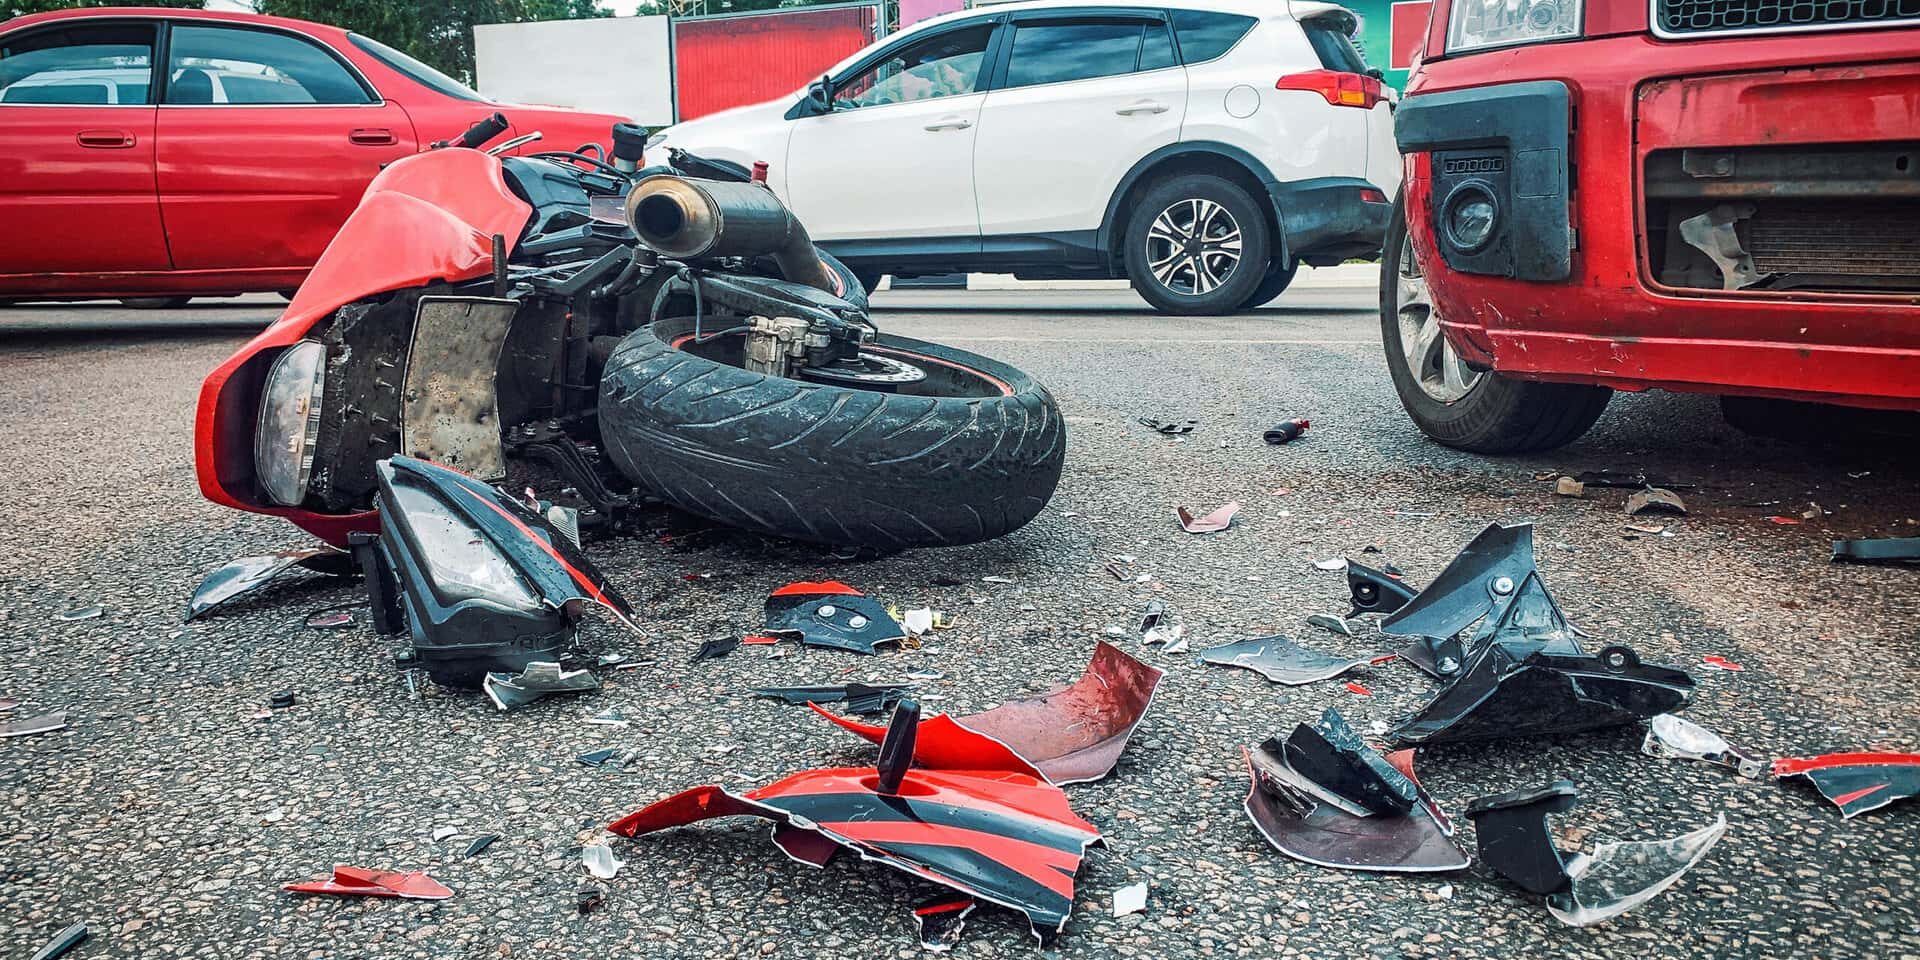 Motorcycle bike accident and car crash, broken and wrecked moto